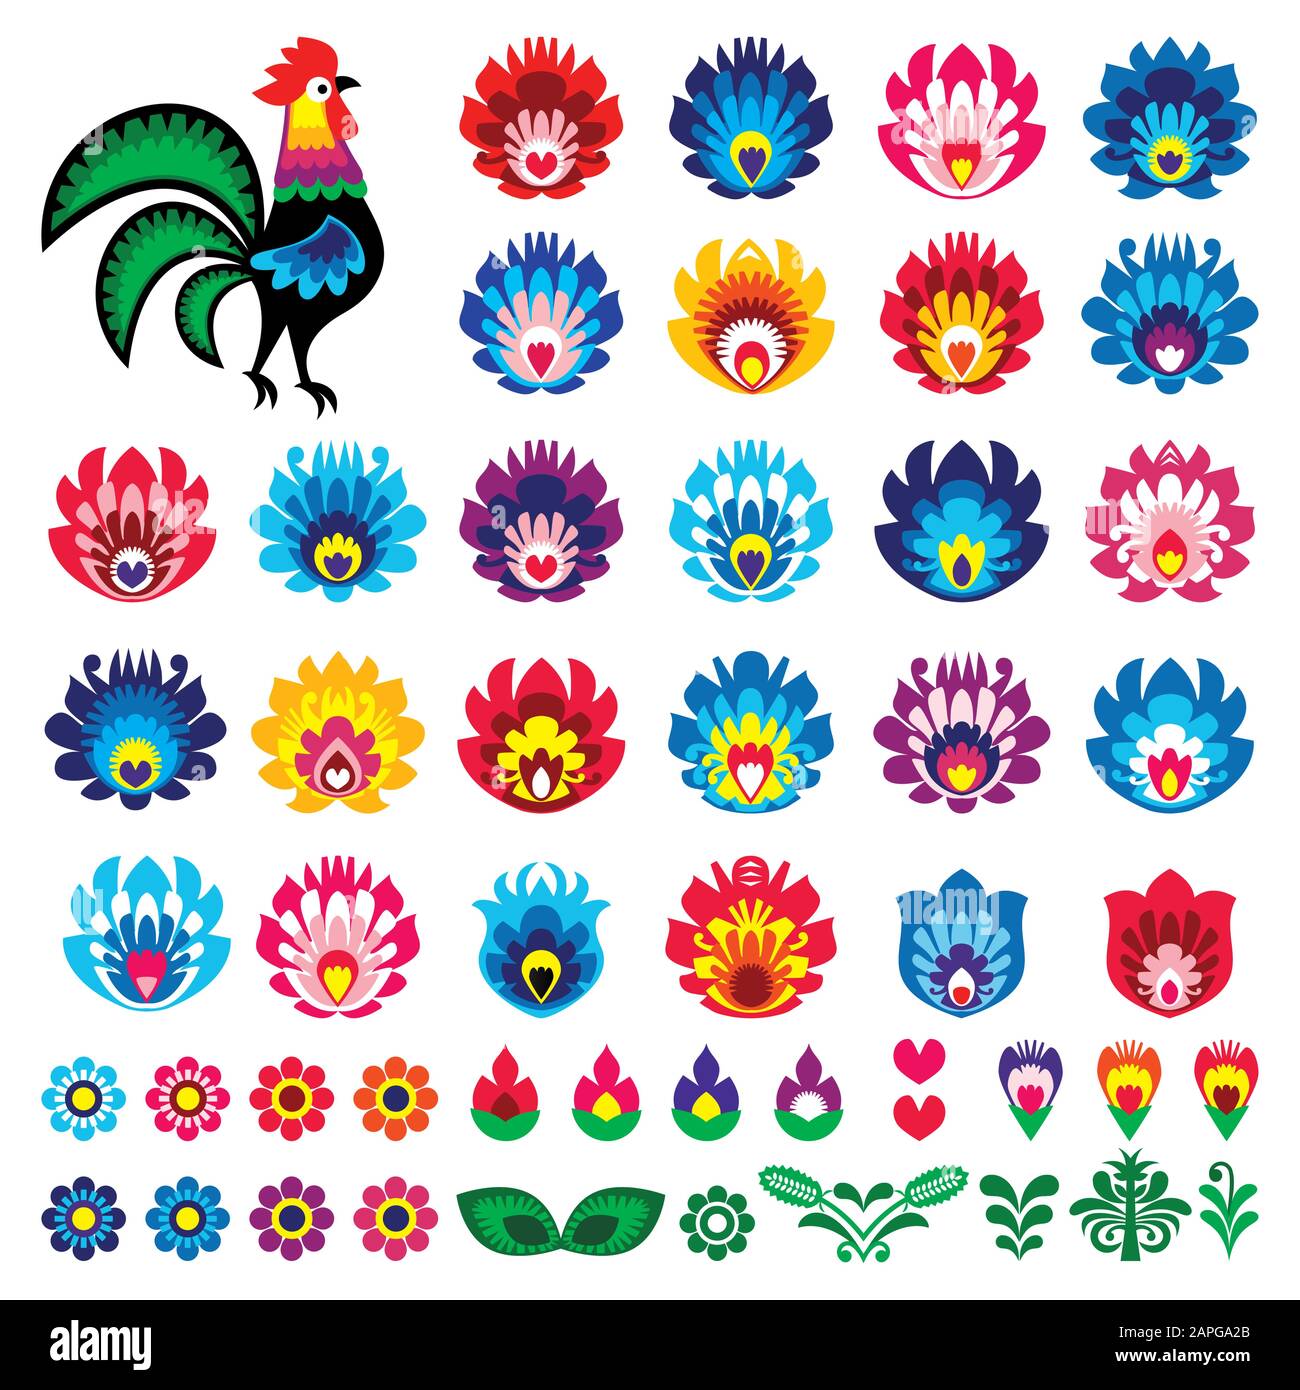 Polish folk art Wycinanki Lowickie vector design elements - flower, rooster, leaves. Perfect for textile patterns or greeting cards Stock Vector